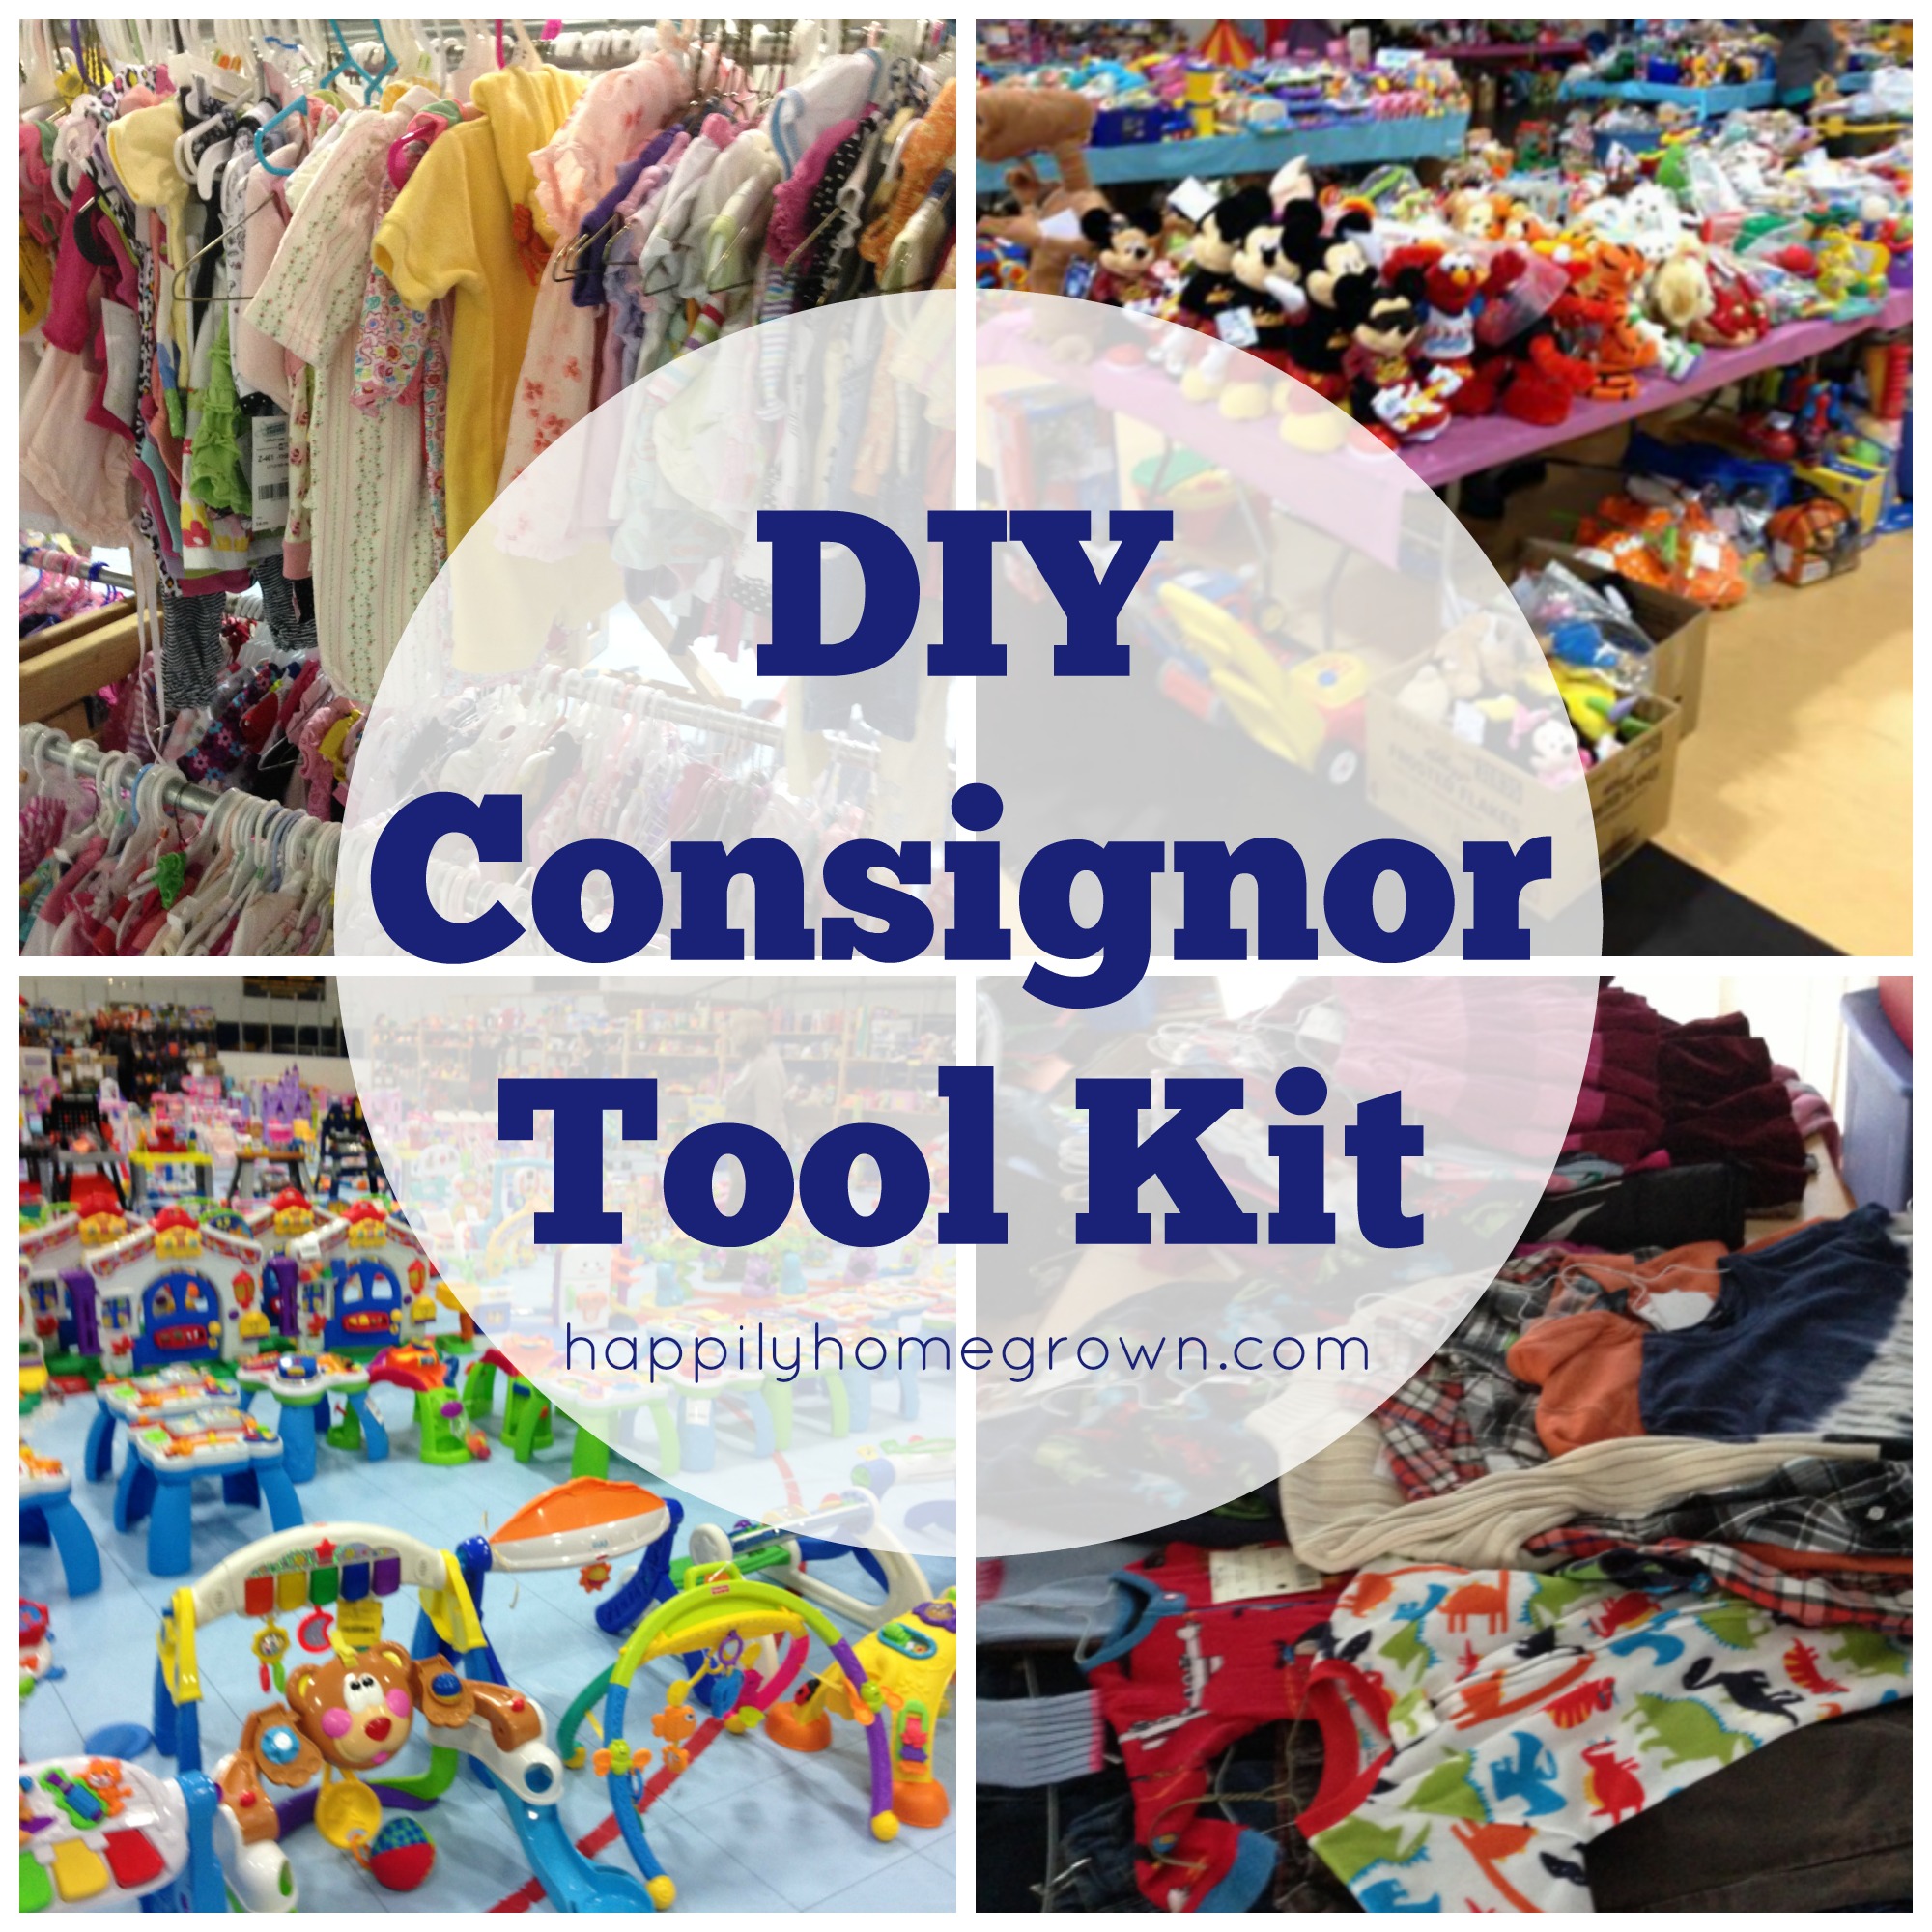 By creating your own consignor tool kit, you will have all of the items you require at your finger tips ready to go each consignment season!